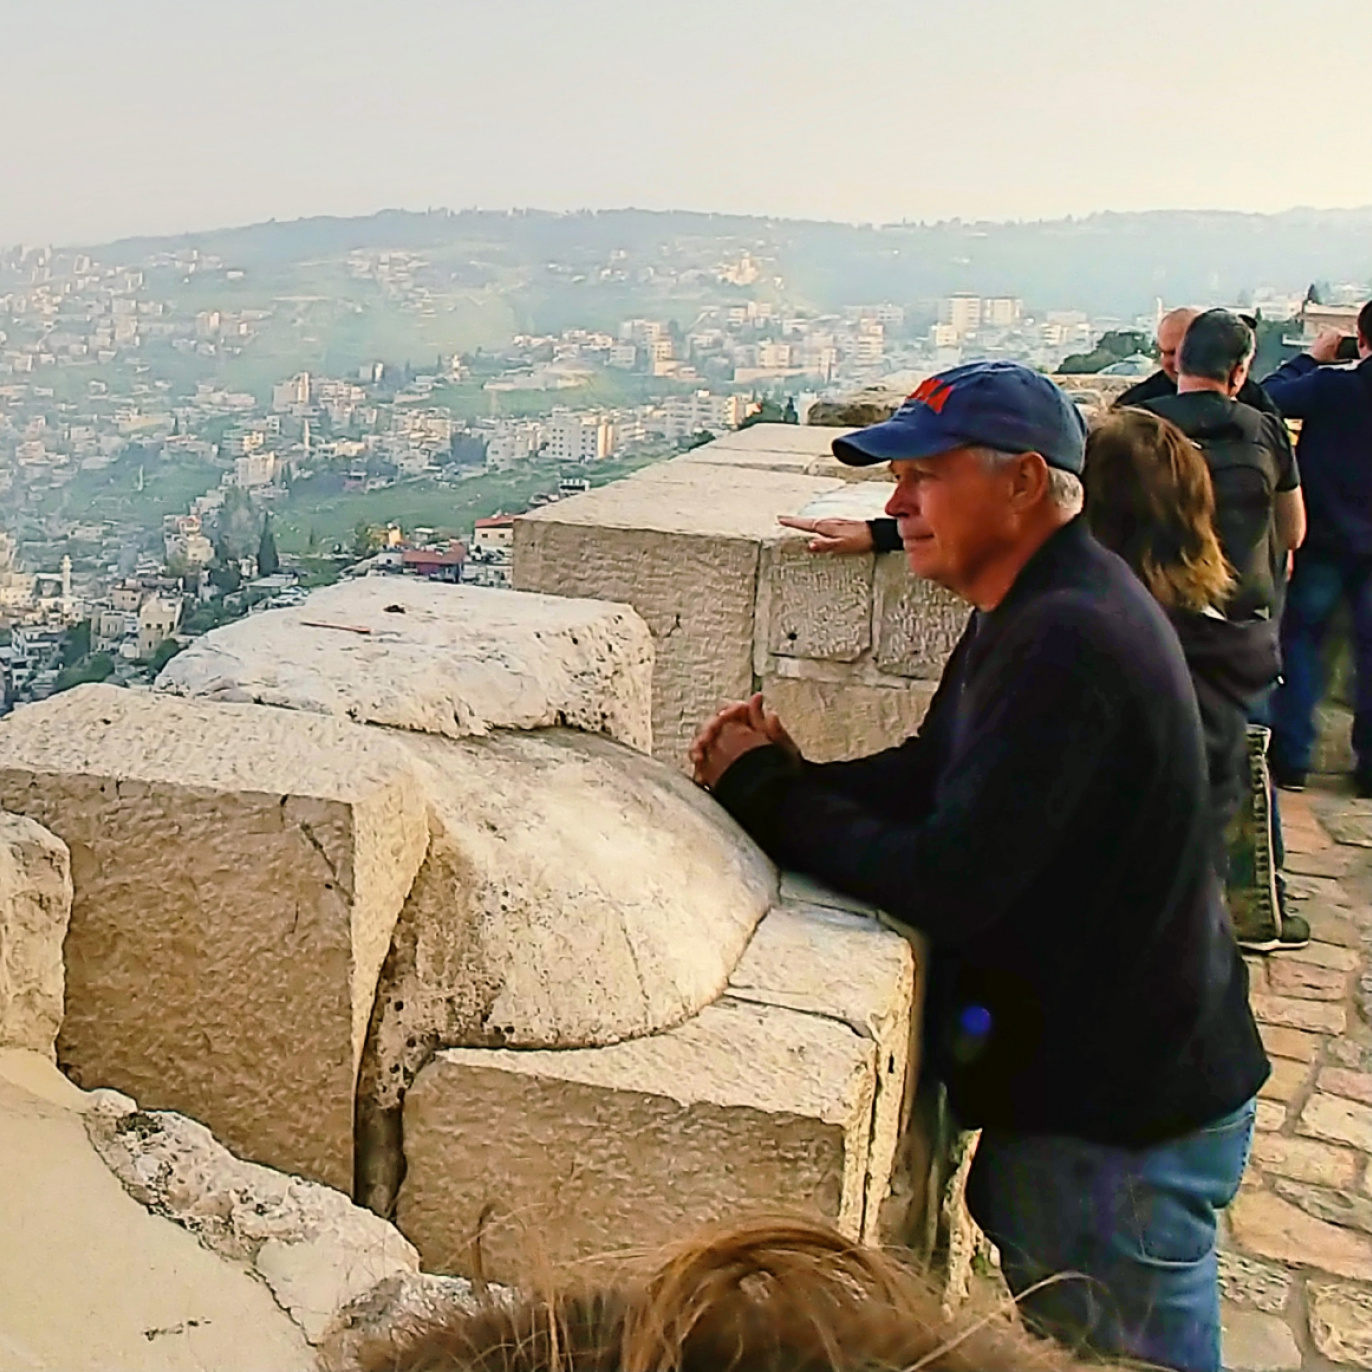 Dad peering across the Kidron Valley toward the Mount of Olives in Jerusalem from his vantage point upon the Old City's walls, 2019.